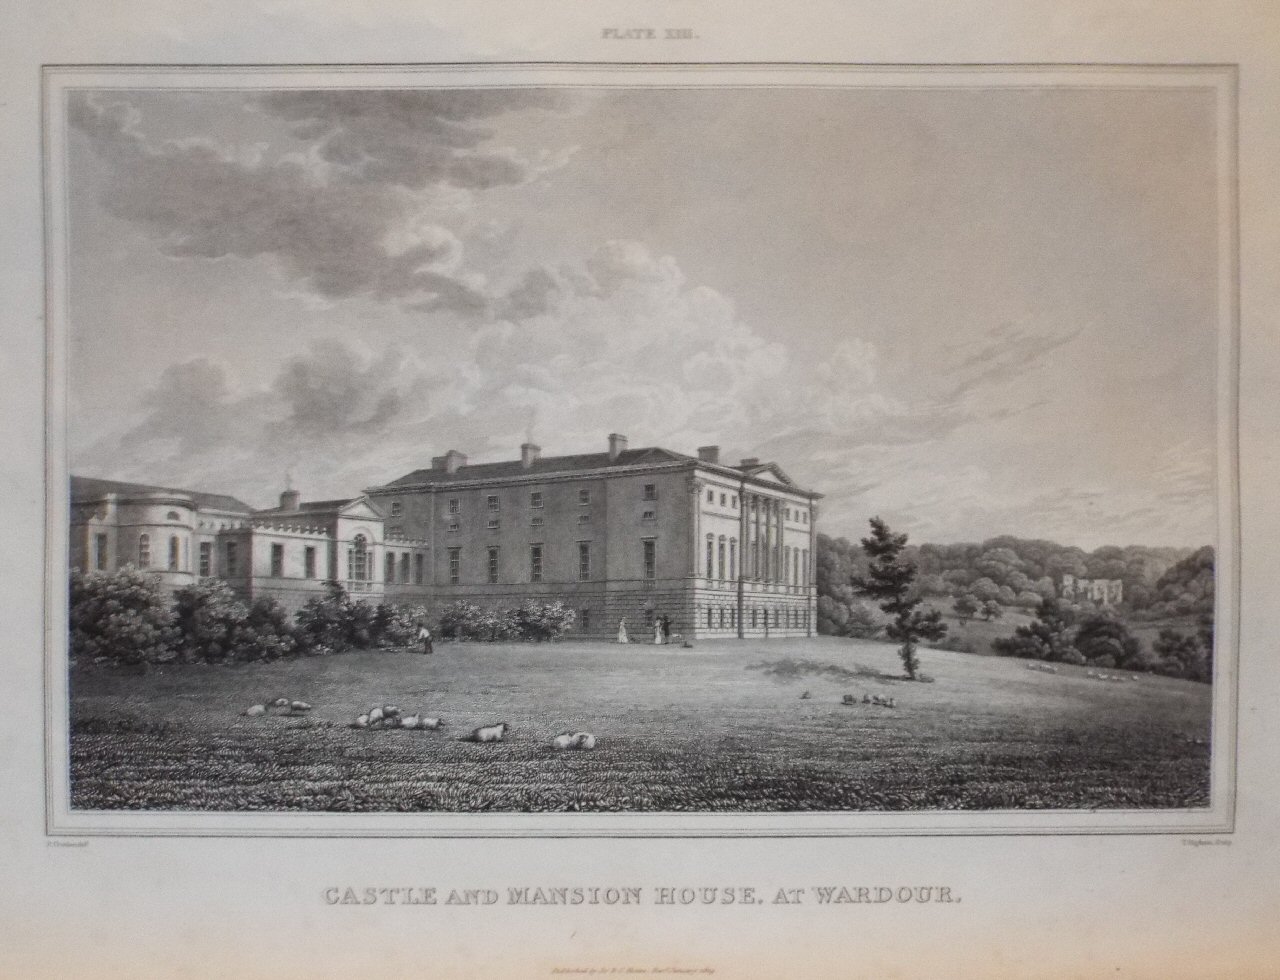 Print - Castle and Mansion House, at Wardour. - Higham